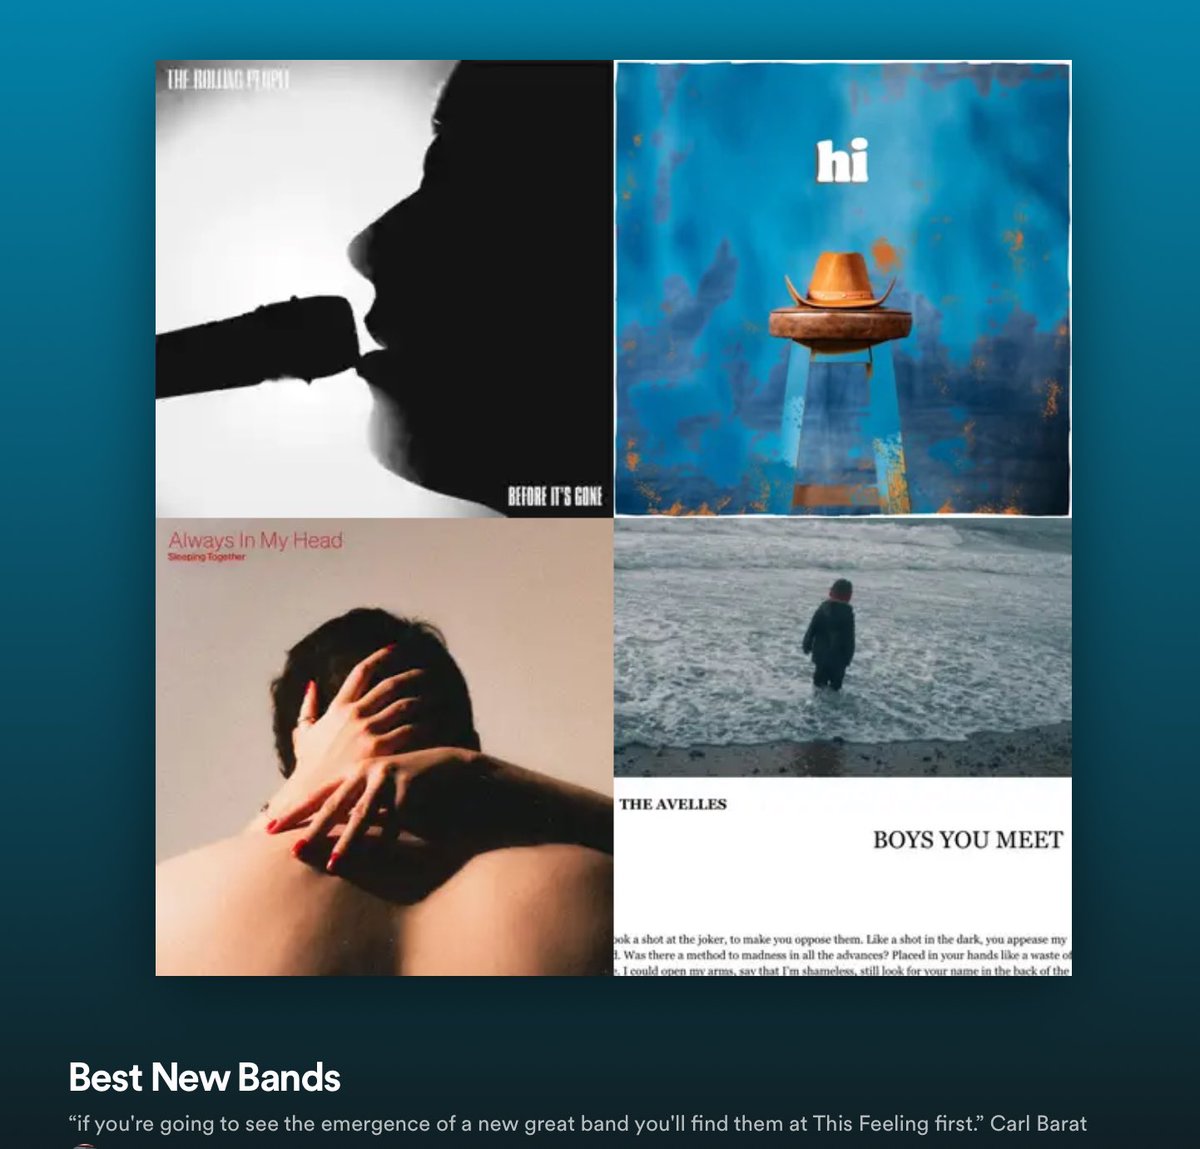 Best New Bands playlist adds 15/2024 🎸🔥 @TRPofficial @88milesband @SleepinTogether @theavelles @STONELIVERPOOL @Corellamusic @abbieizzard @_commongoldfish @MothersUgly @AutomotionBand @seagoth_mp3 @thevoydofficial @soulloveband_ @TheOuters @GOSofficial_